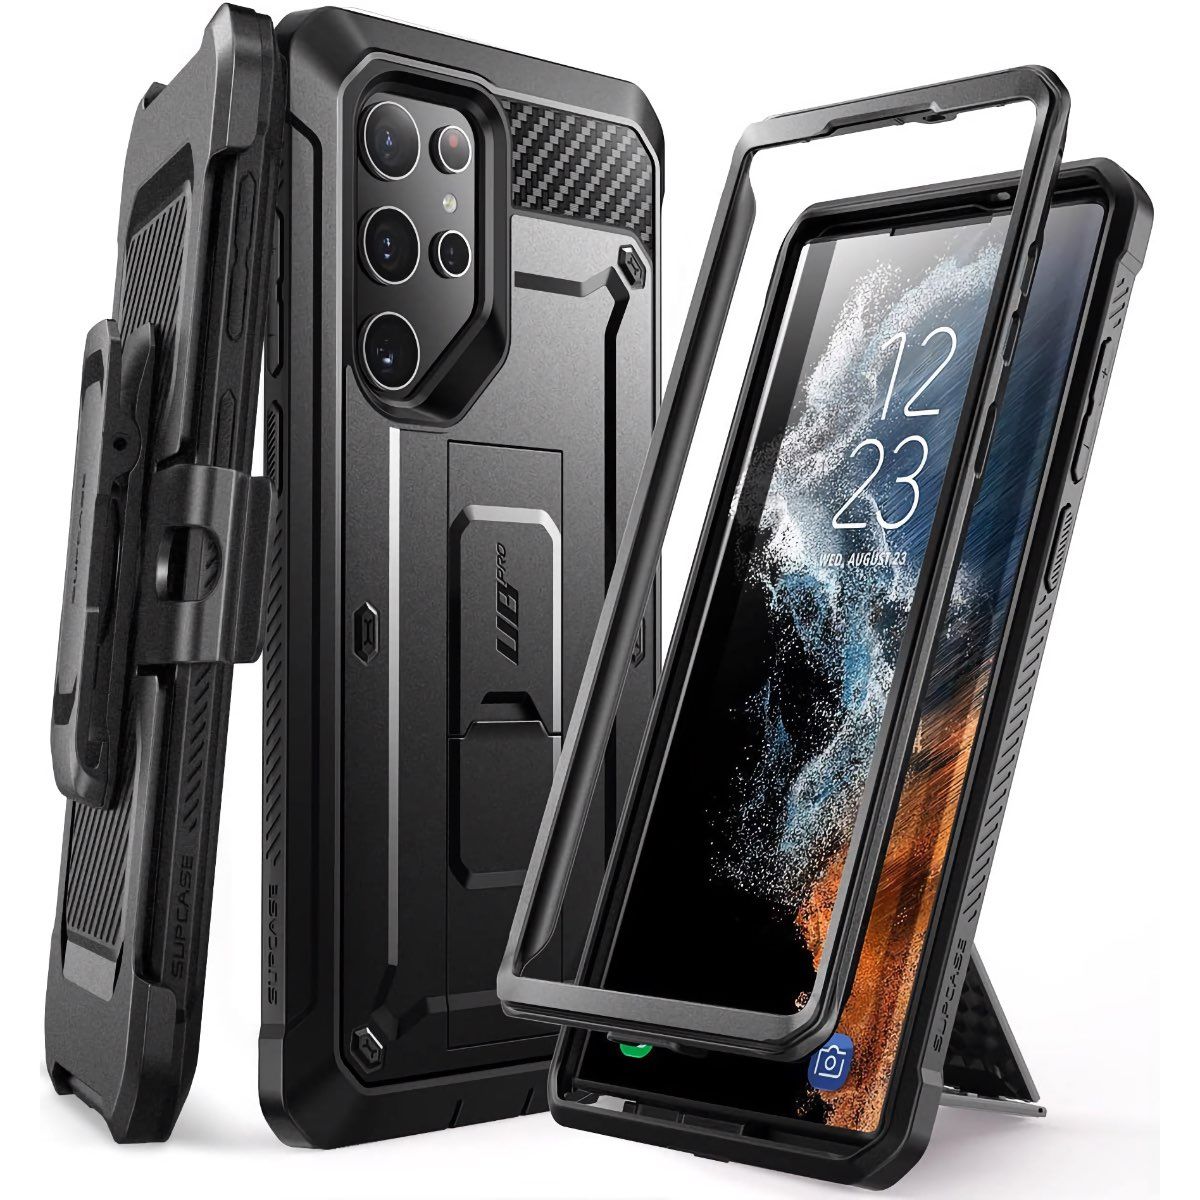 The best Samsung Galaxy S22 Ultra cases you can buy - Android Authority